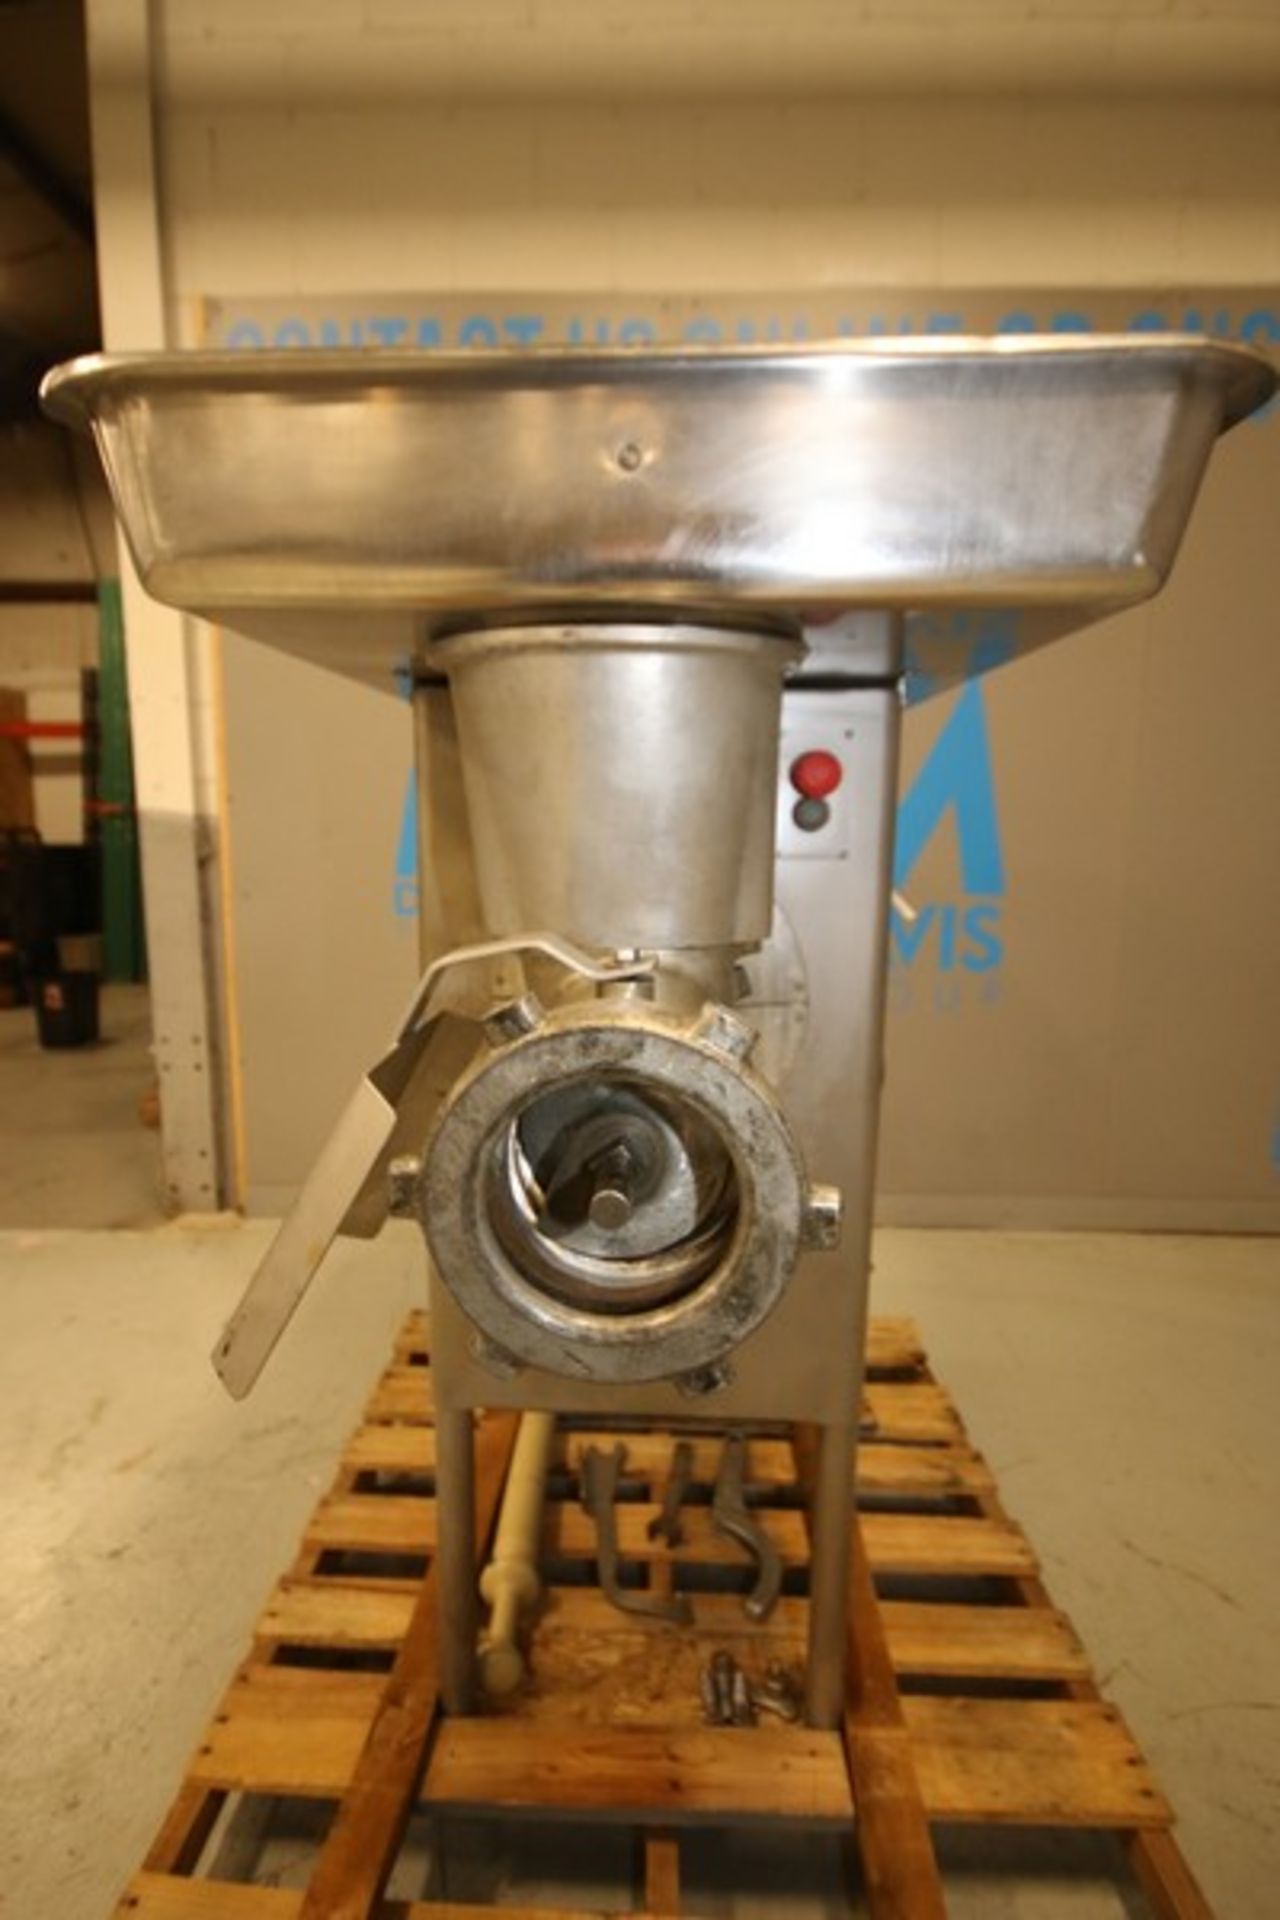 Butcher Boy S/S Floor Grinder, Model A52, SN 17012189, 7.5 hp, 460 V (INV#83499)(Located @ the MDG - Image 4 of 7